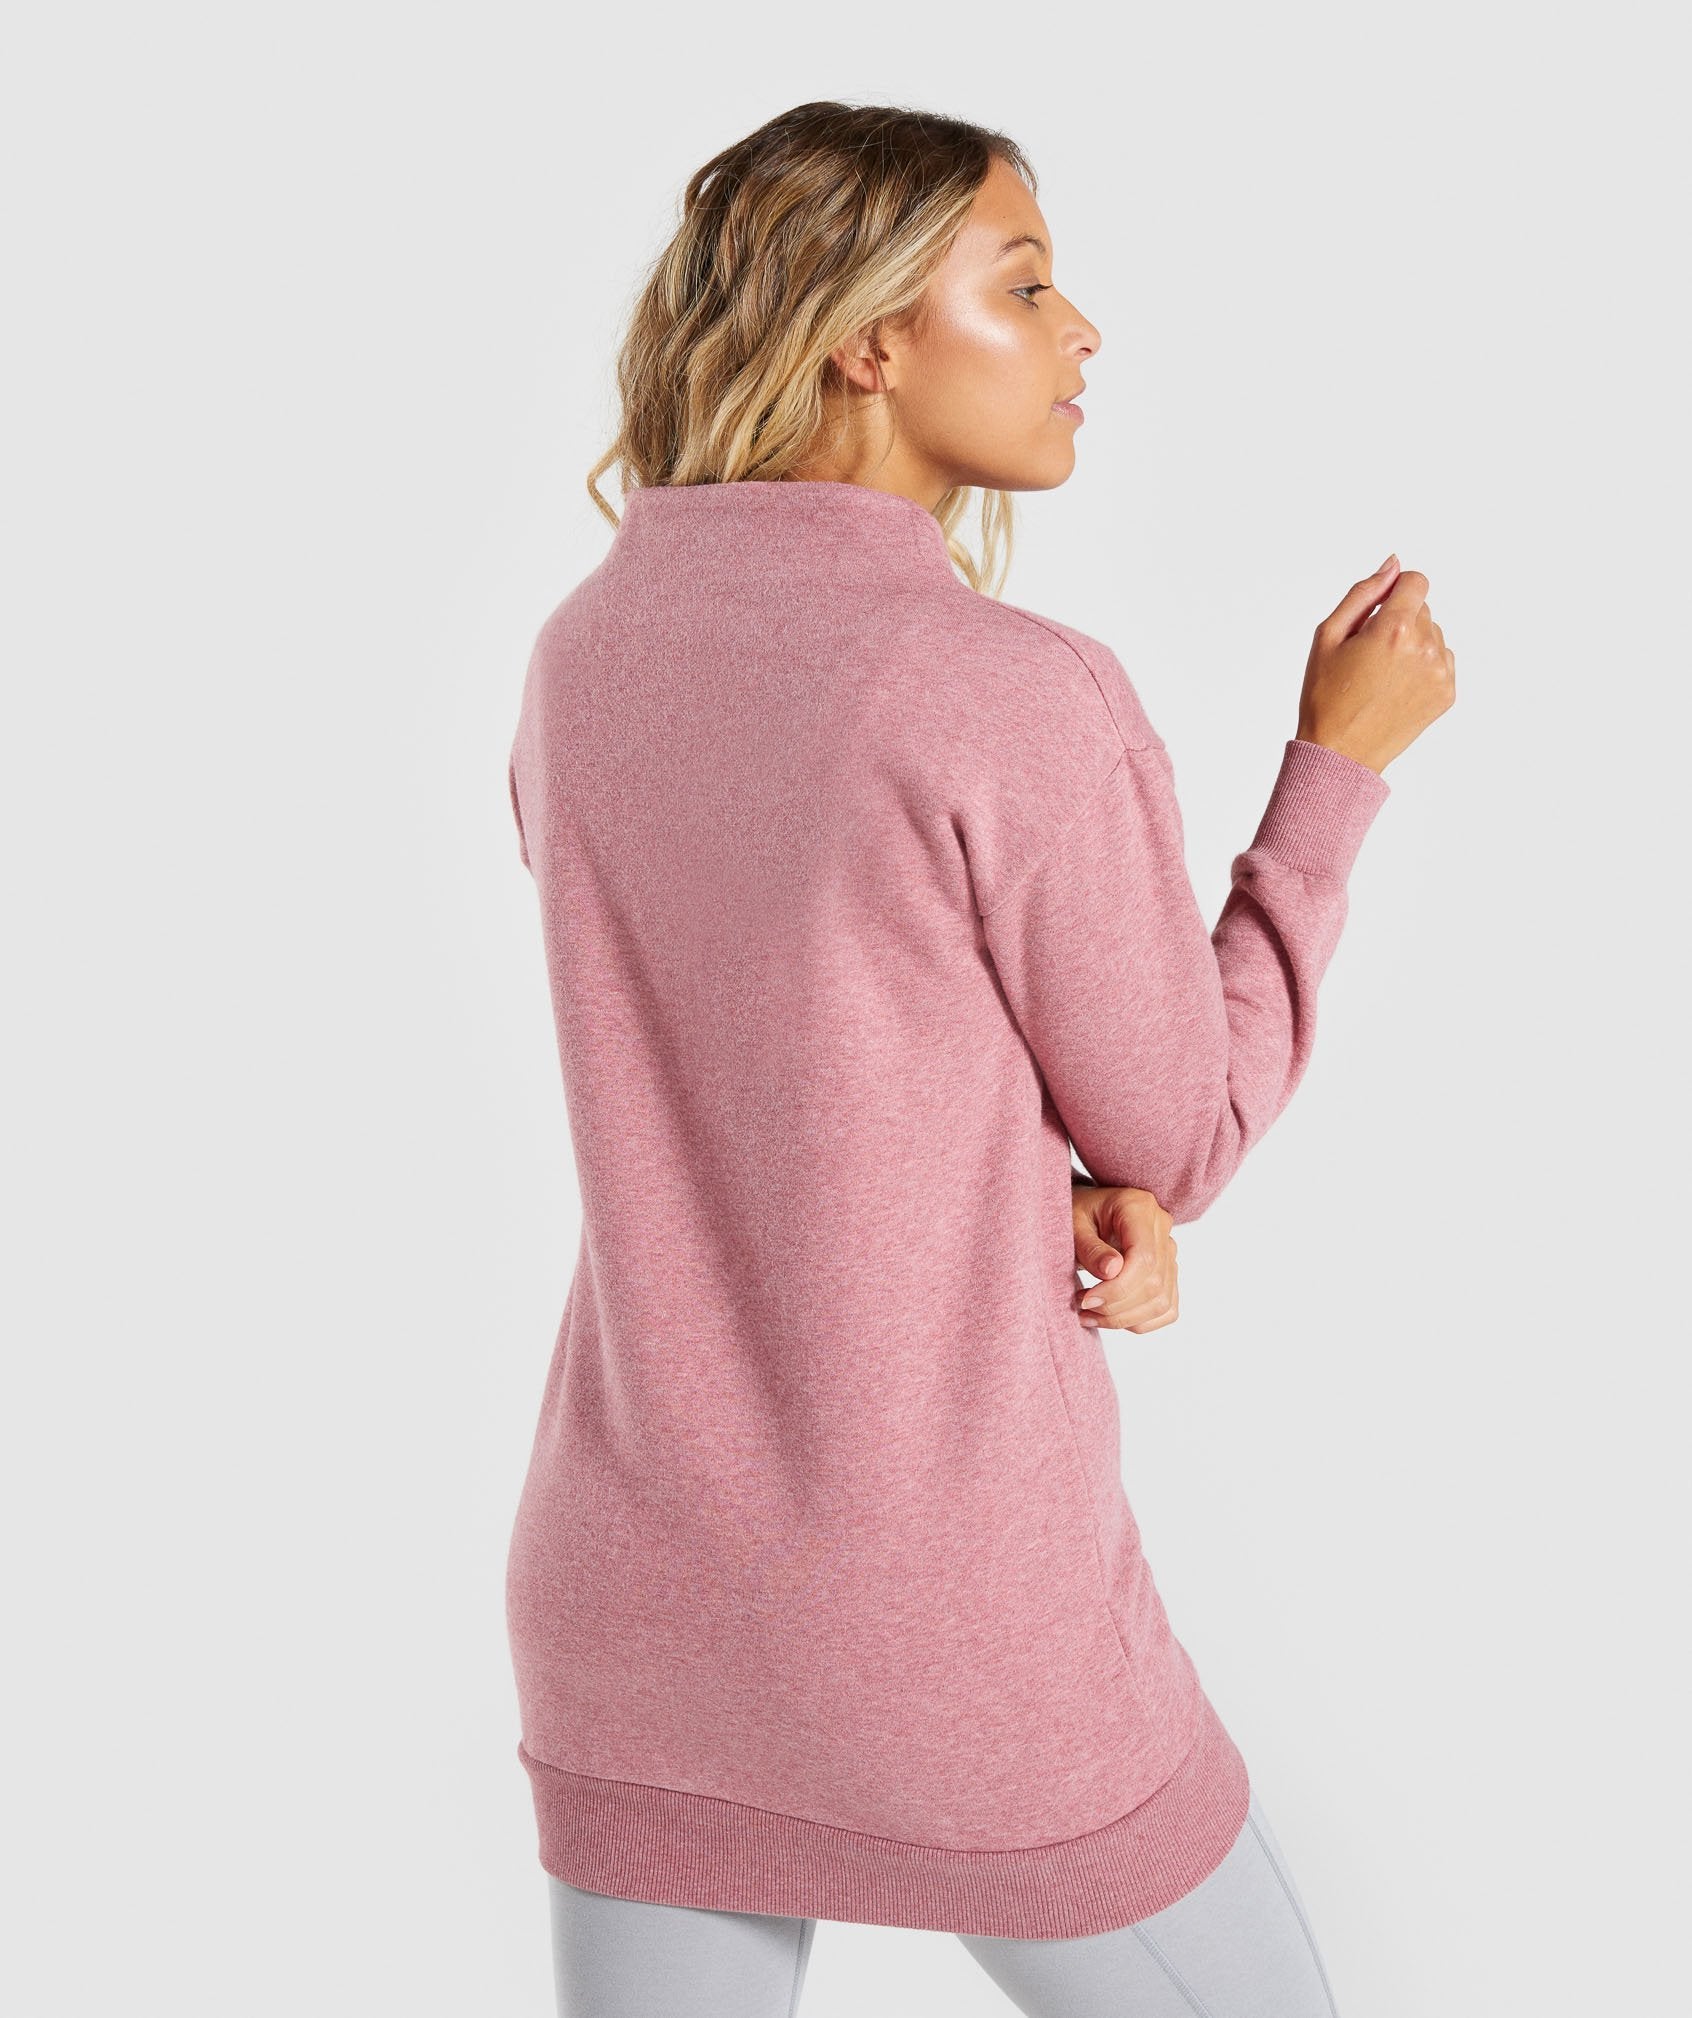 So Soft Sweater in Dusky Pink Marl - view 2